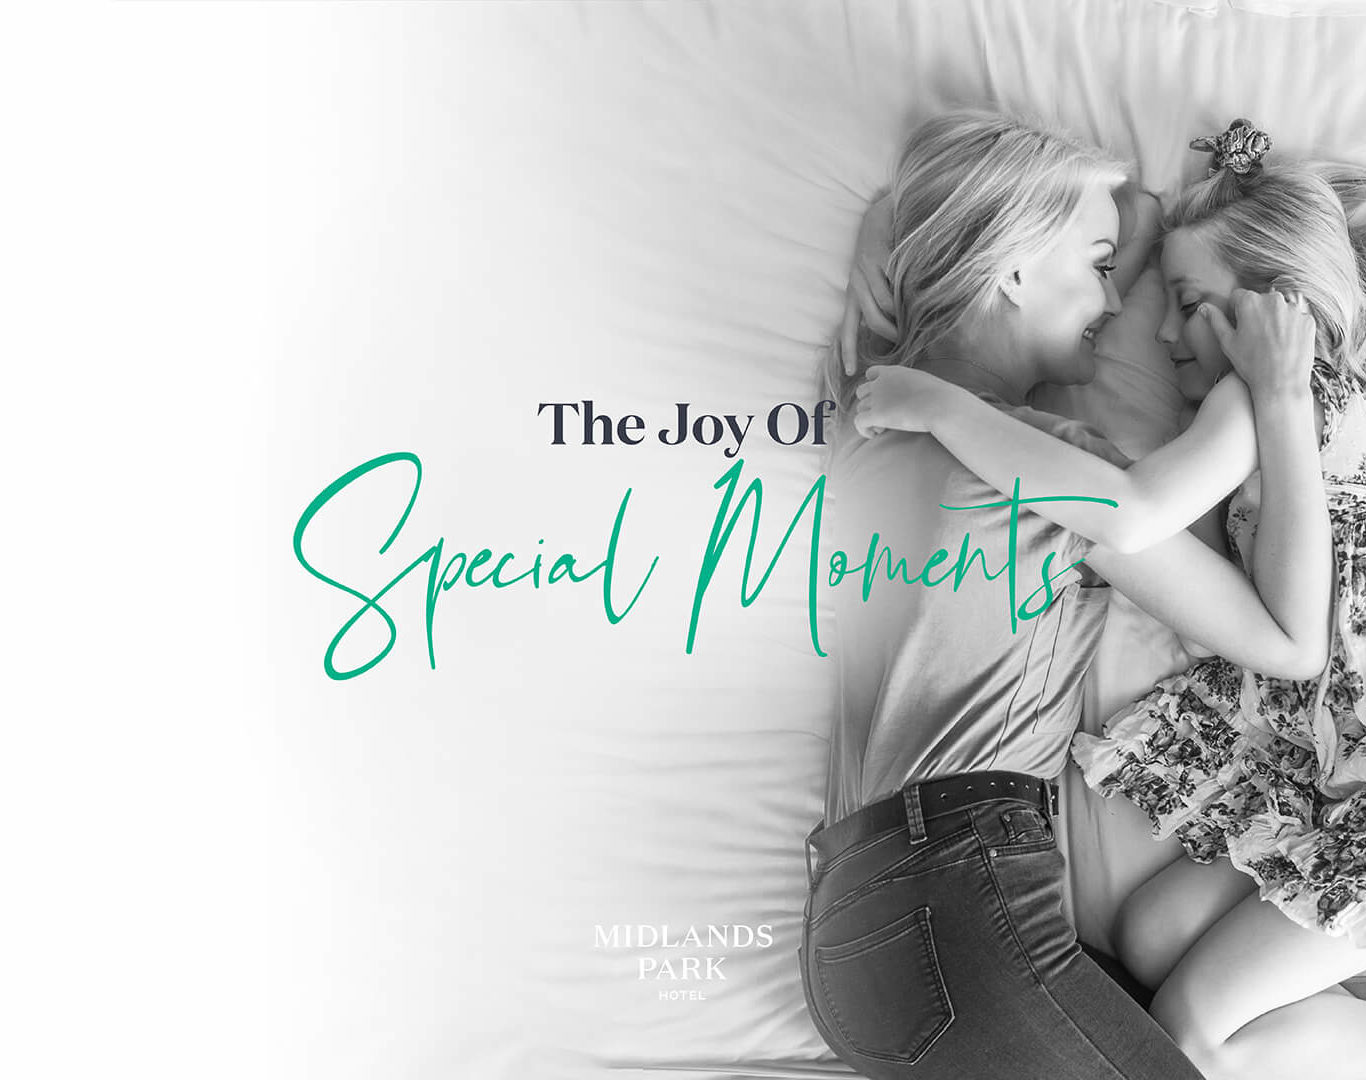 The Joy of Special Moments